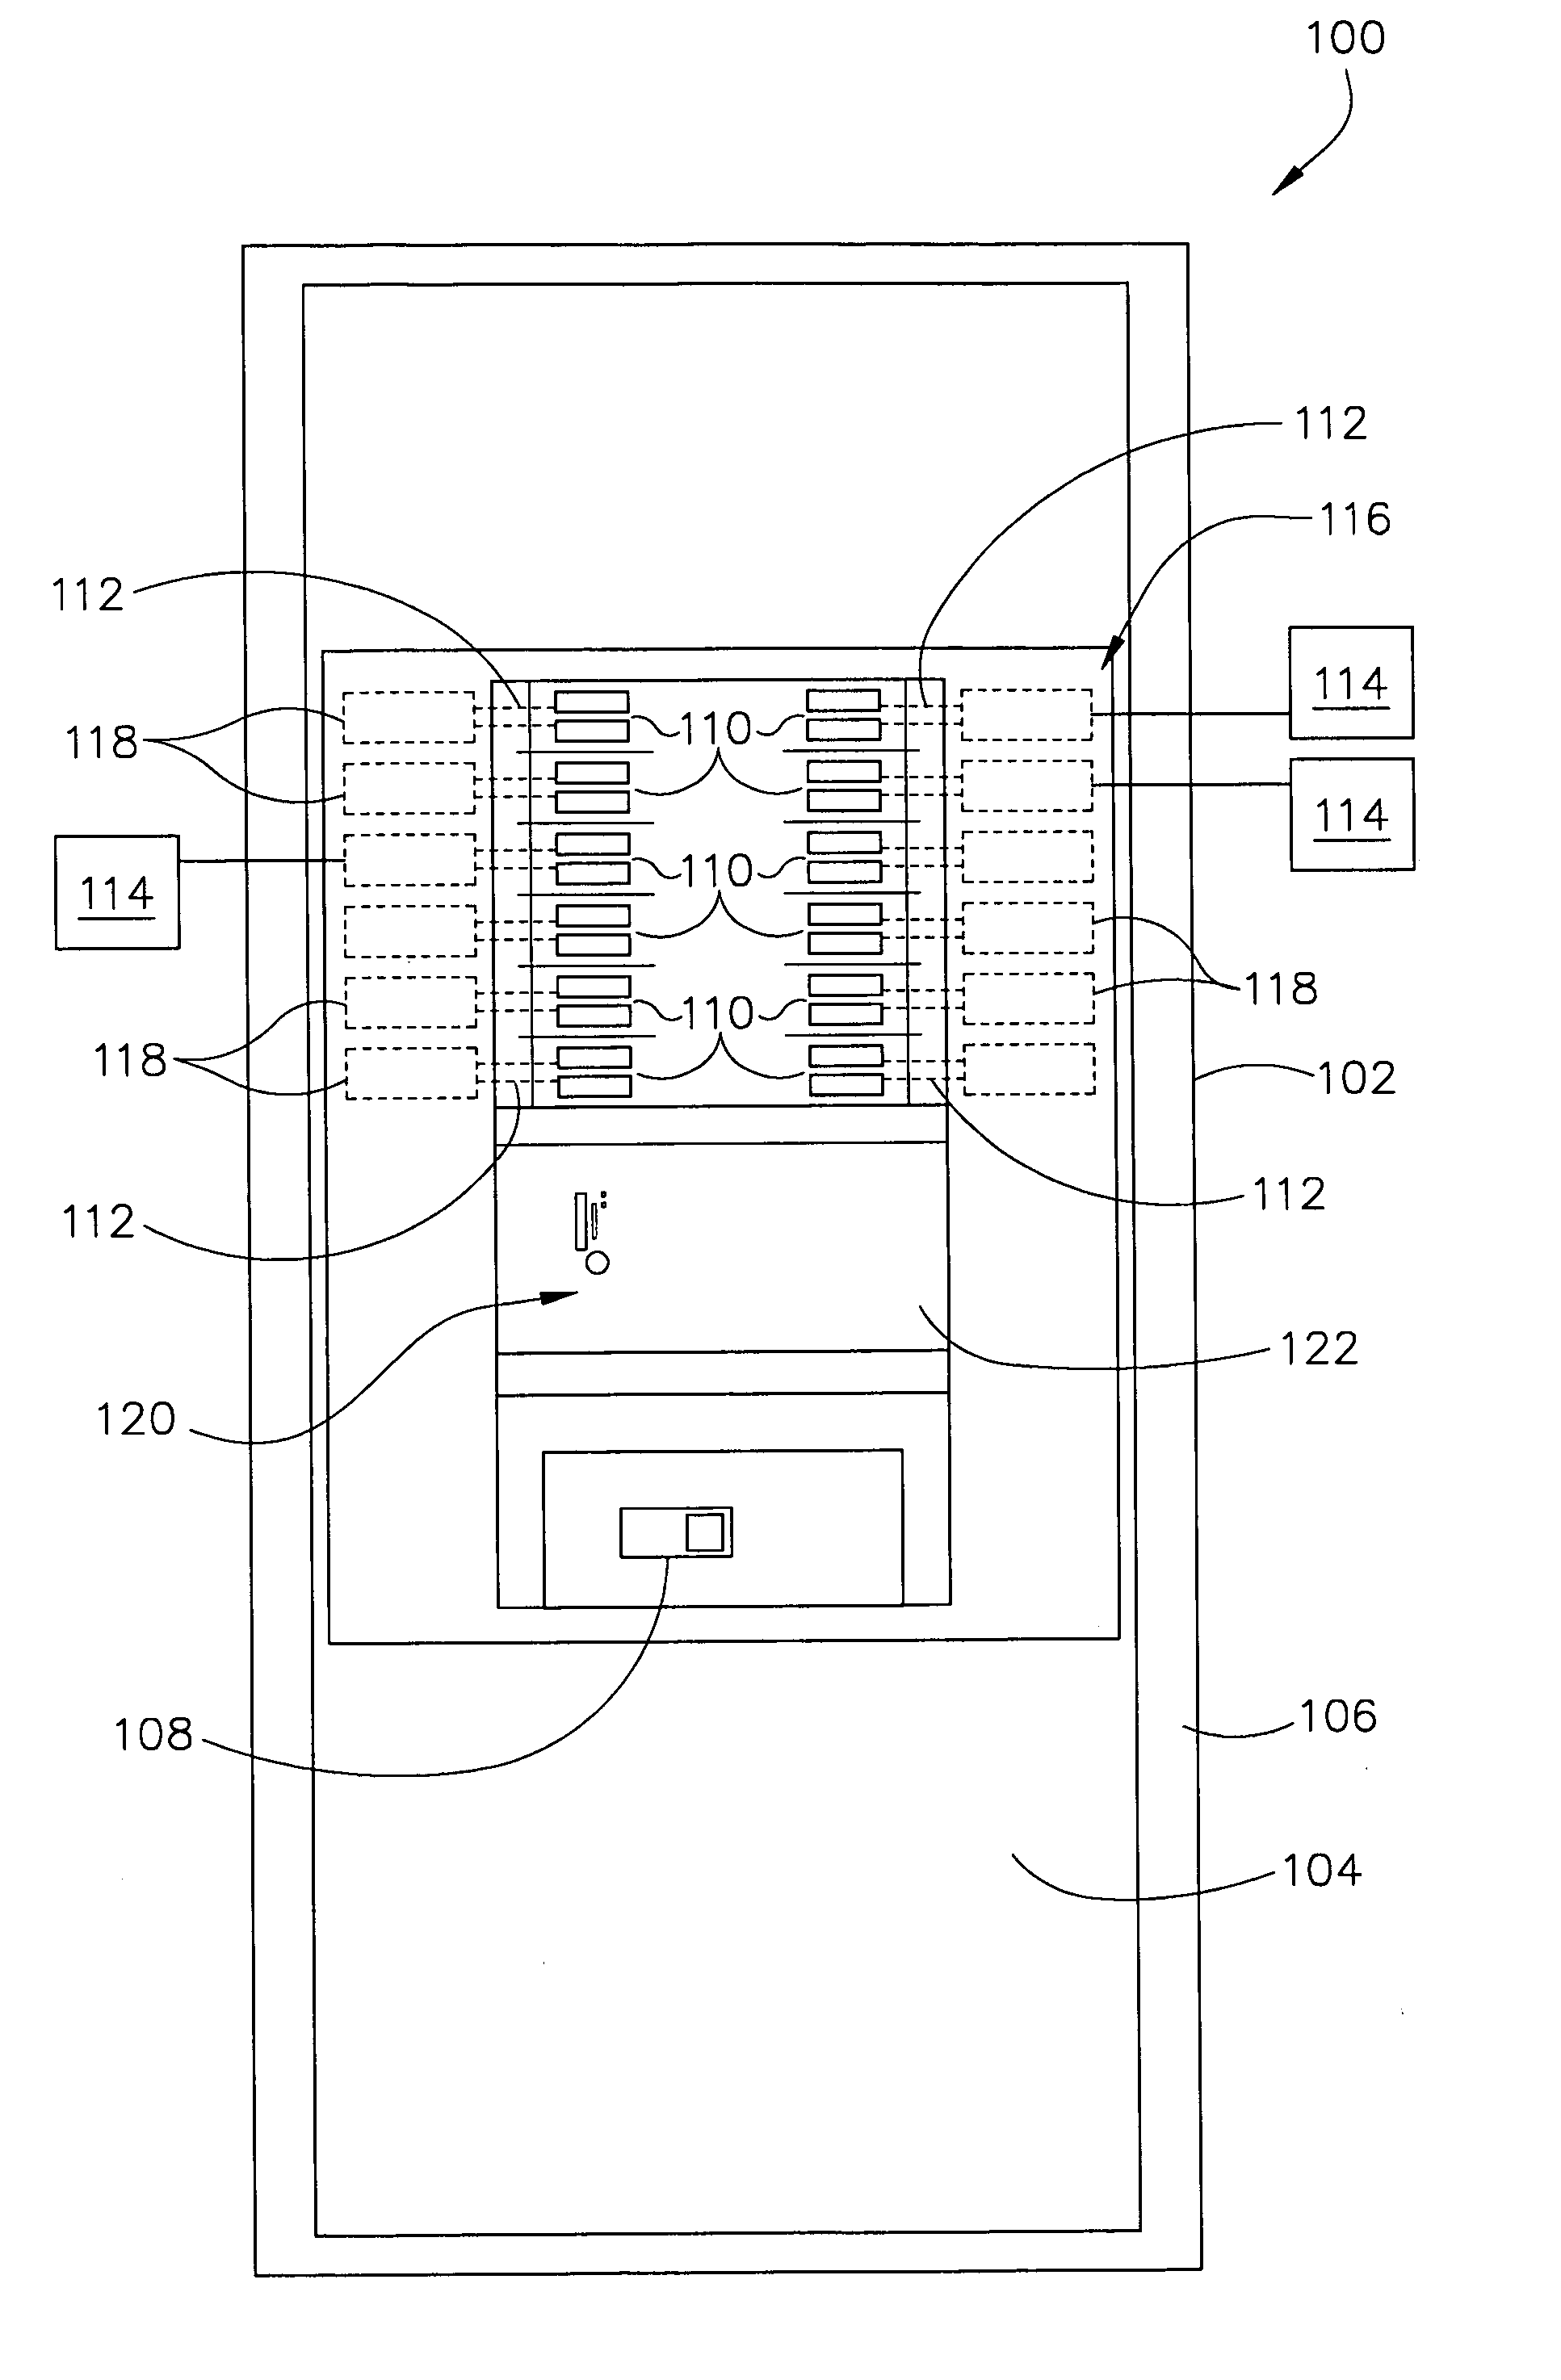 Methods and systems for electrical power sub-metering